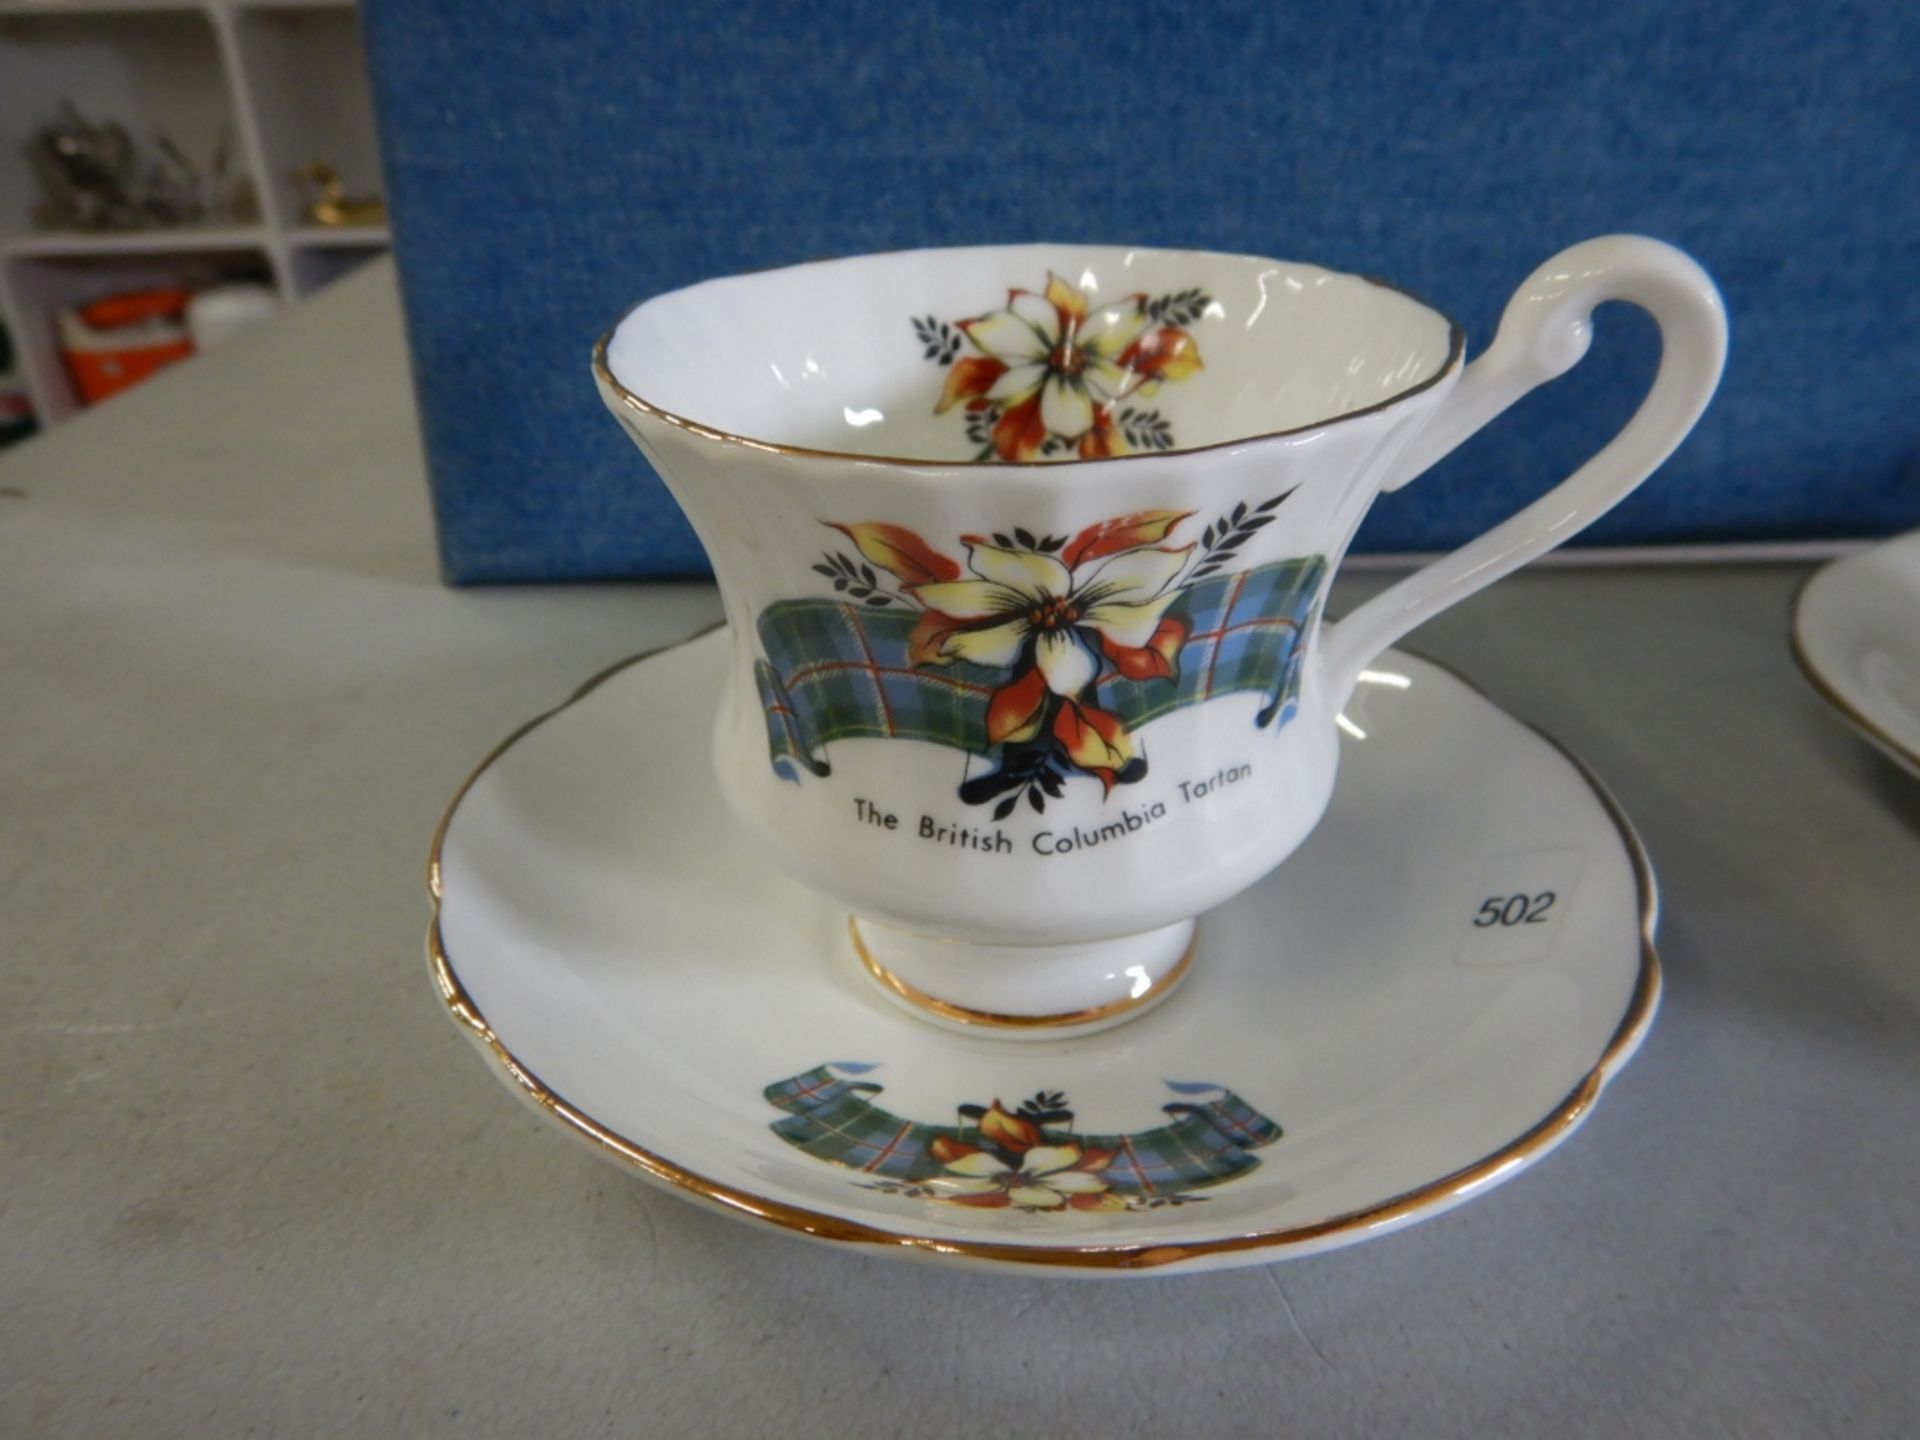 ANTIQUE TEACUPS & SAUCERS - MADE IN ENGLAND - LOT OF 3 - FINE BONE CHINA "PRINCE EDWARD ISLAND" - - Image 2 of 15